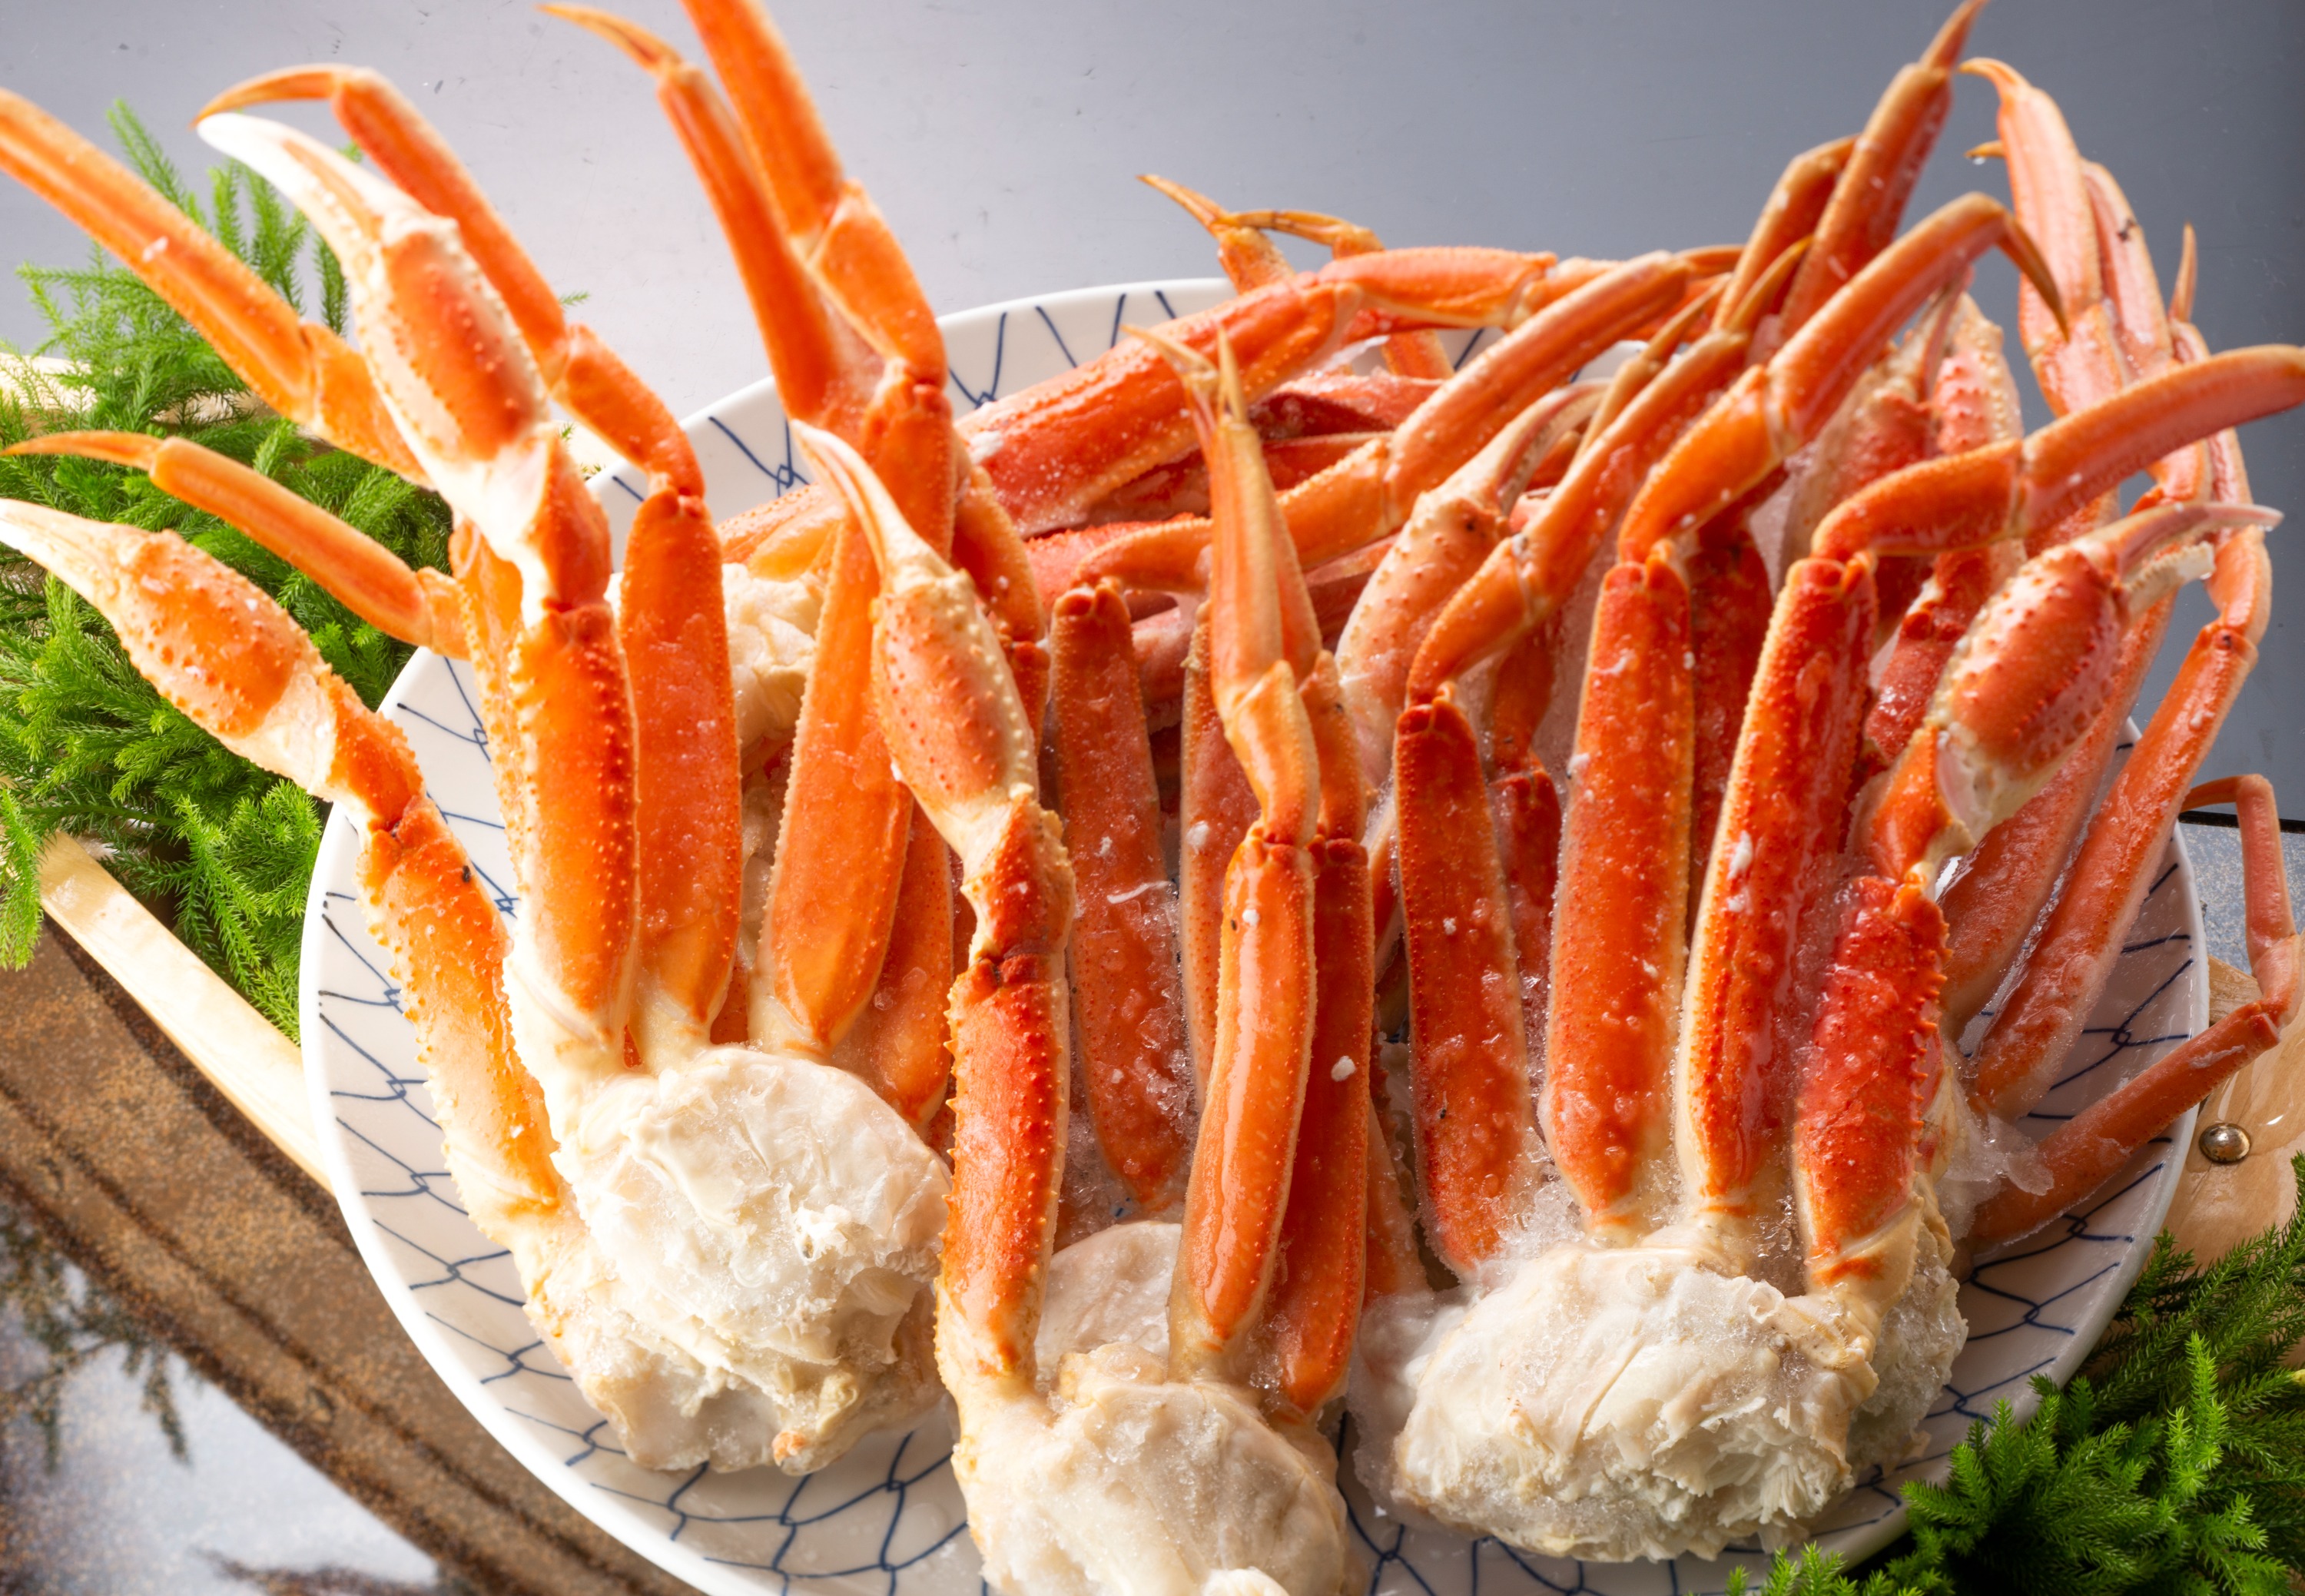 Mt.Fuji One Day Tour from Tokyo with All-You-Can-Eat Crabs